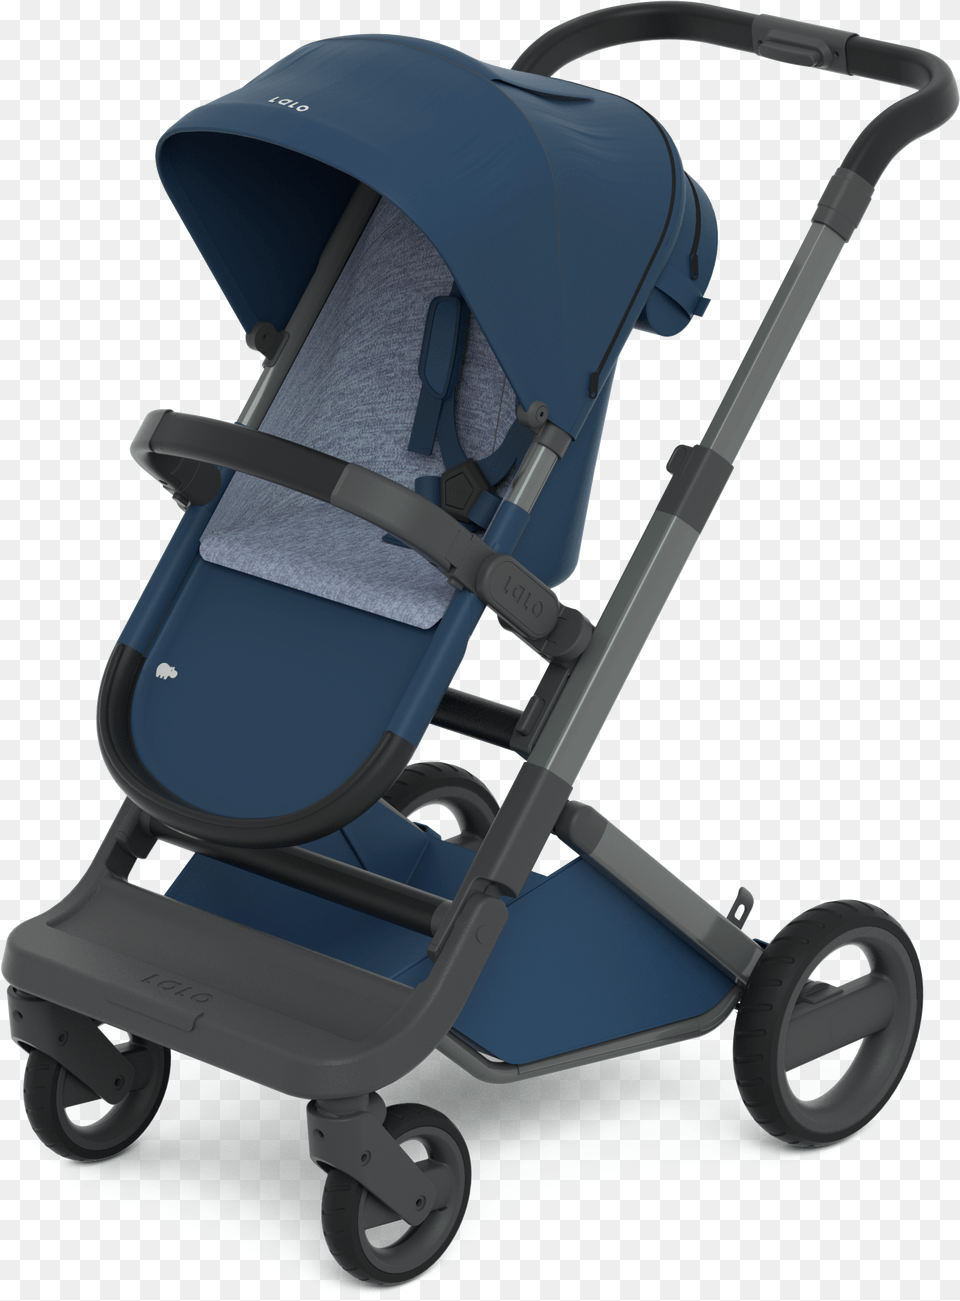 The Best Baby Strollers Of 2020 Stroller, Device, Grass, Lawn, Lawn Mower Free Transparent Png